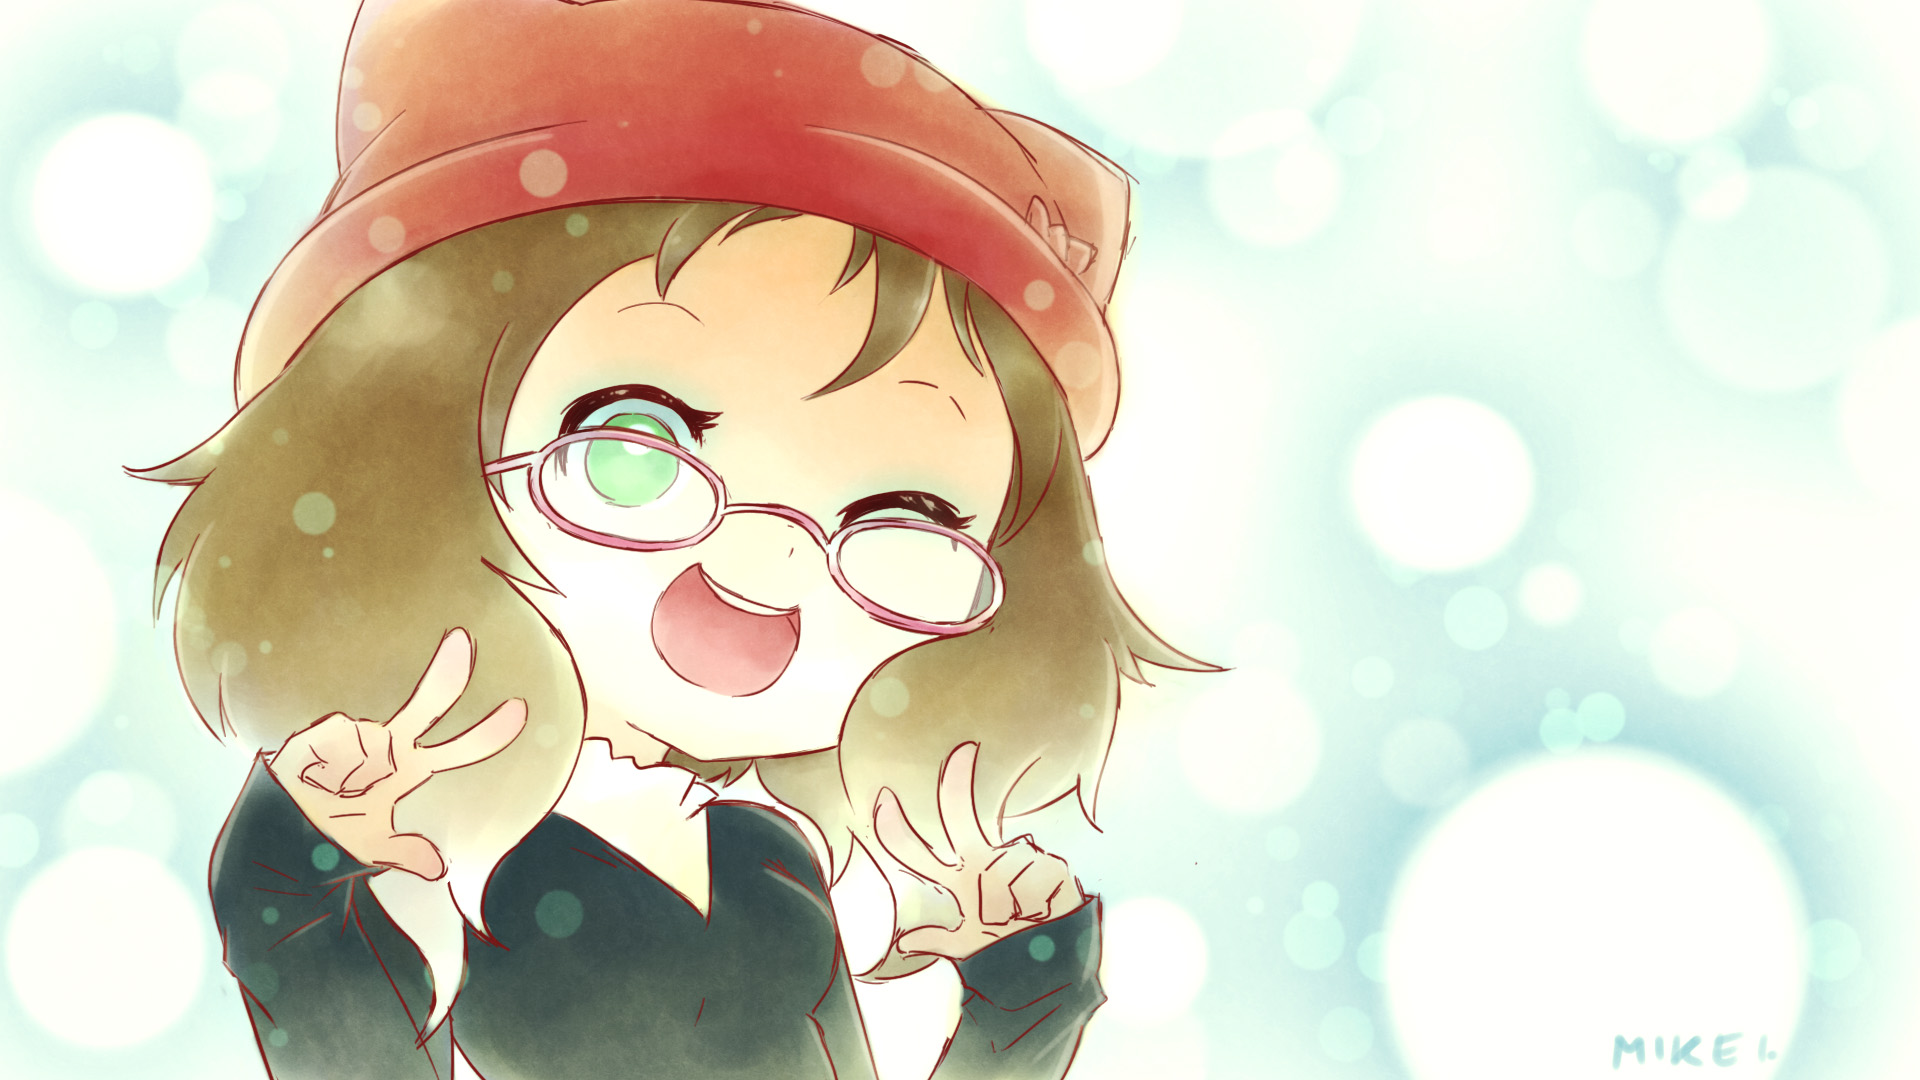 Megane is Moe by Mikeinel on DeviantArt